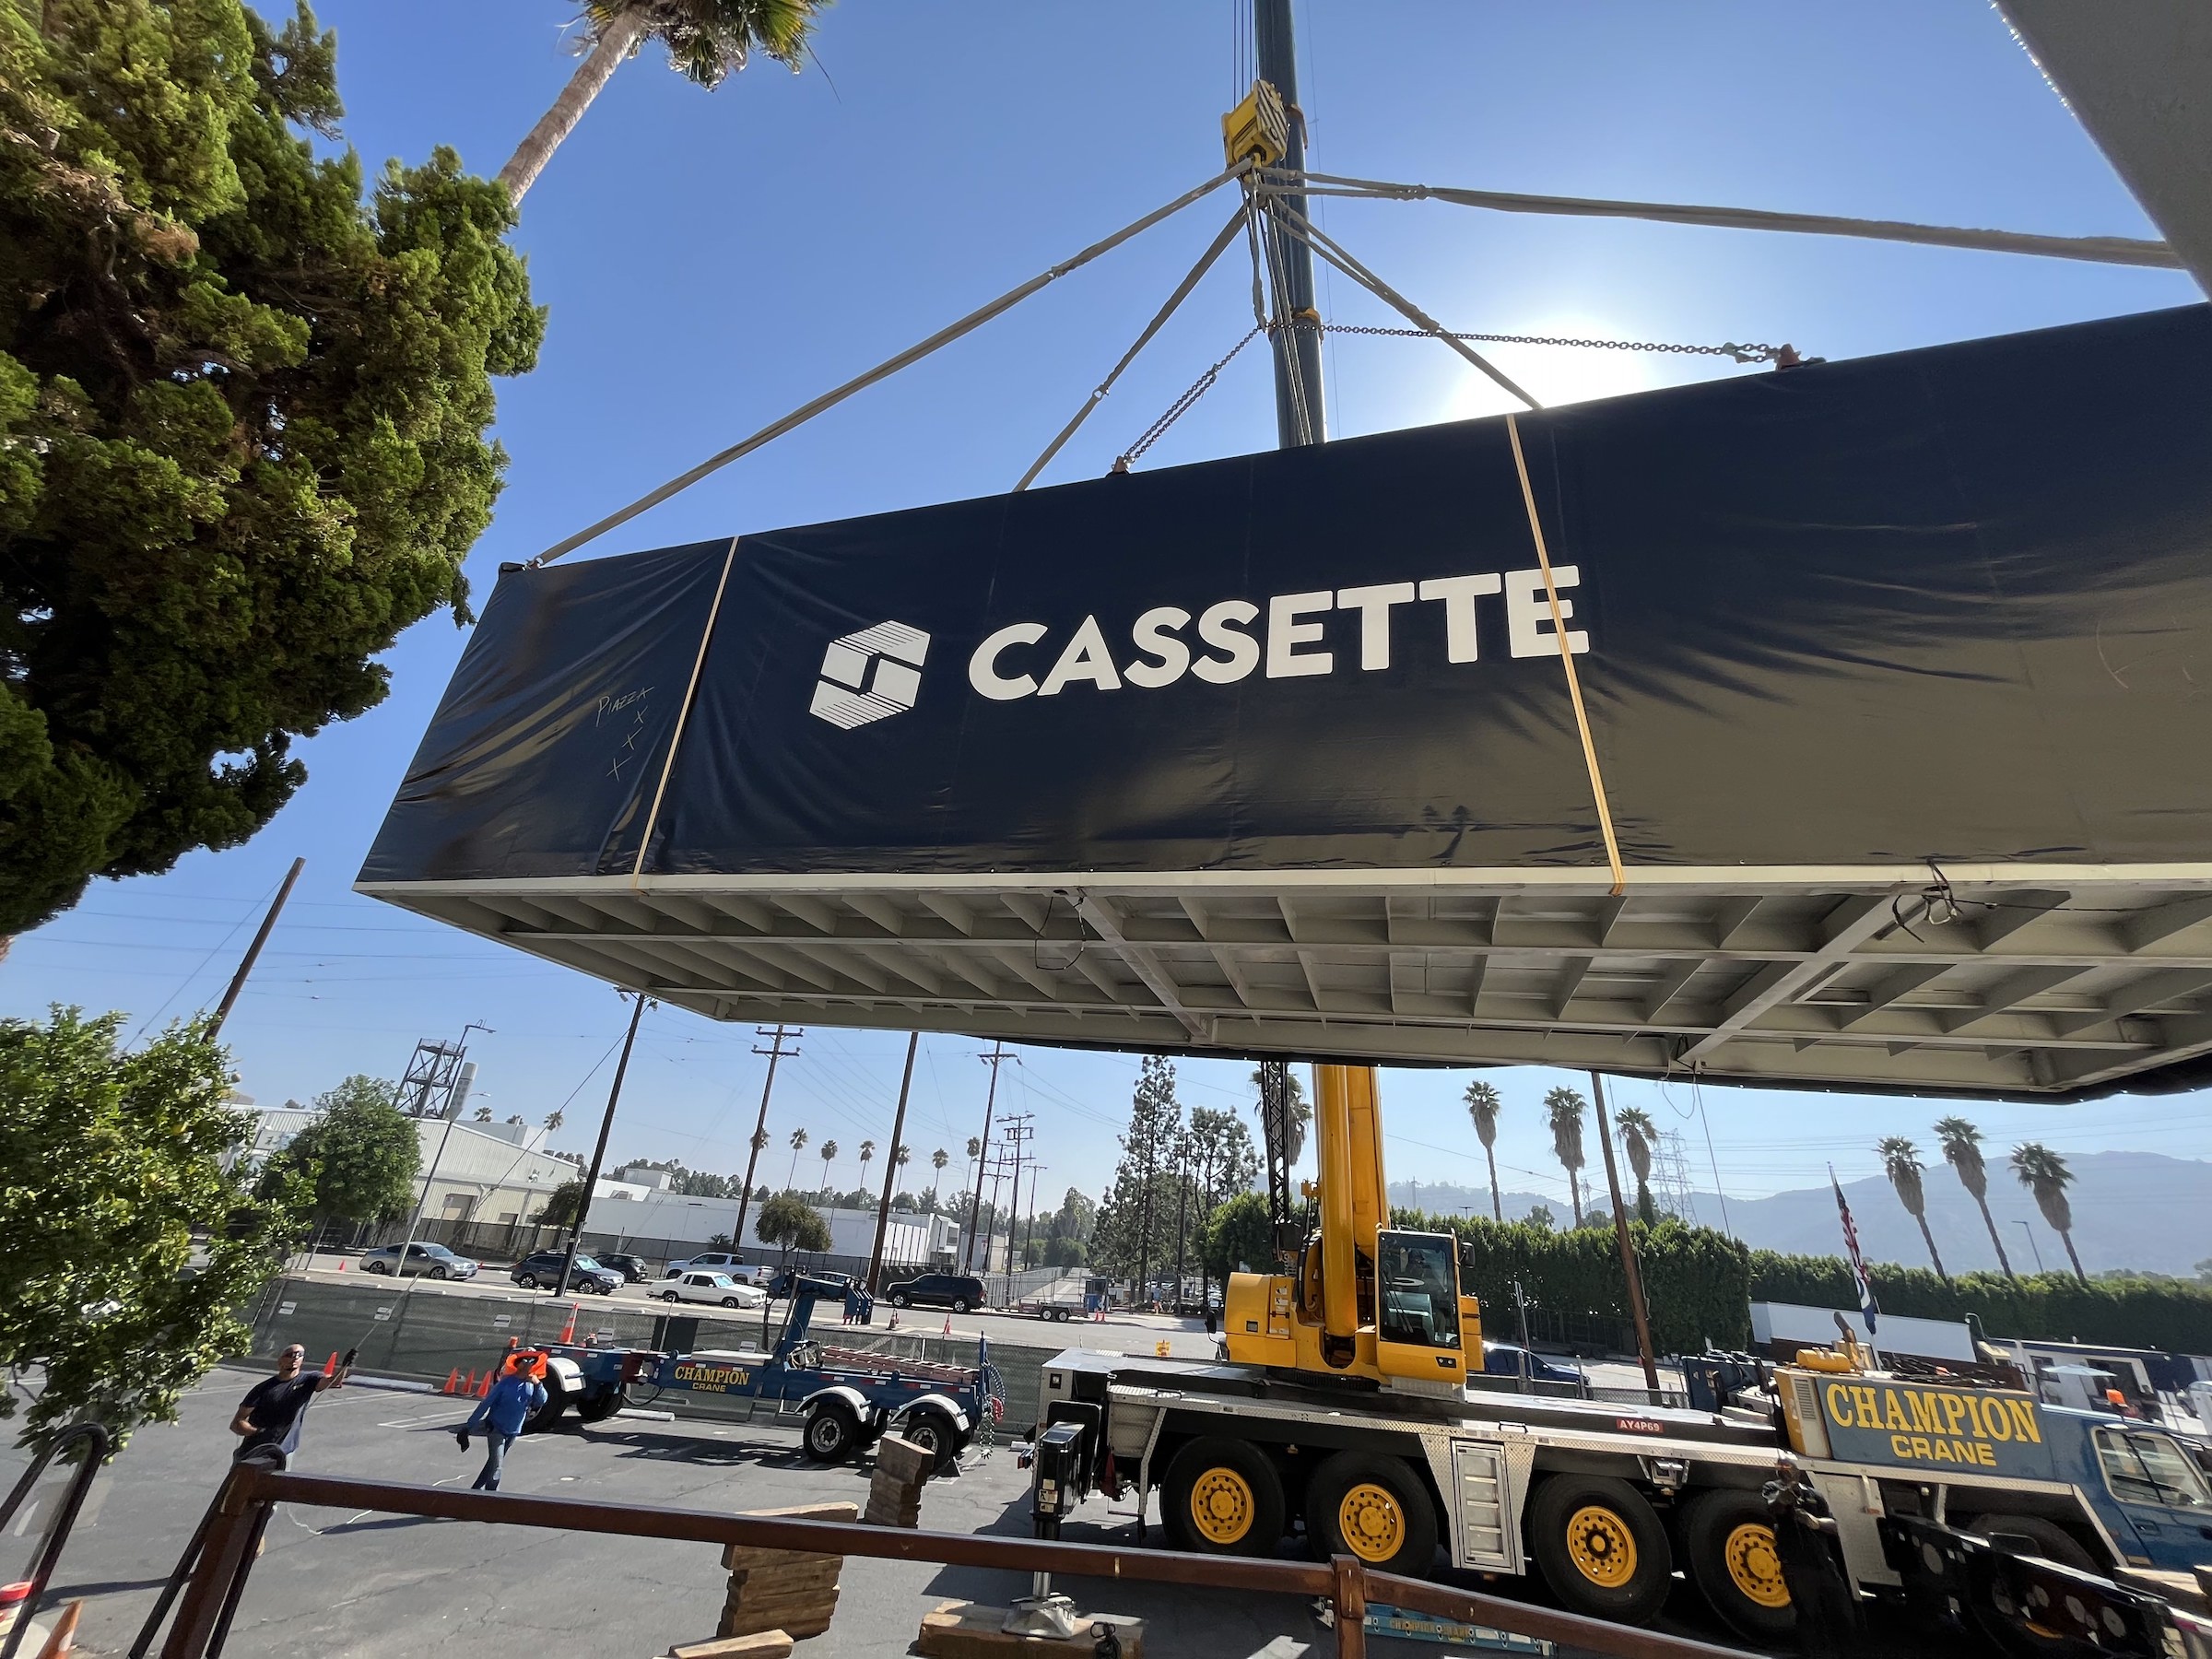 The 600-sf pod is sized to be transported easily, and requires only a modicum of site construction, for which Cassette Systems will use several contractors.